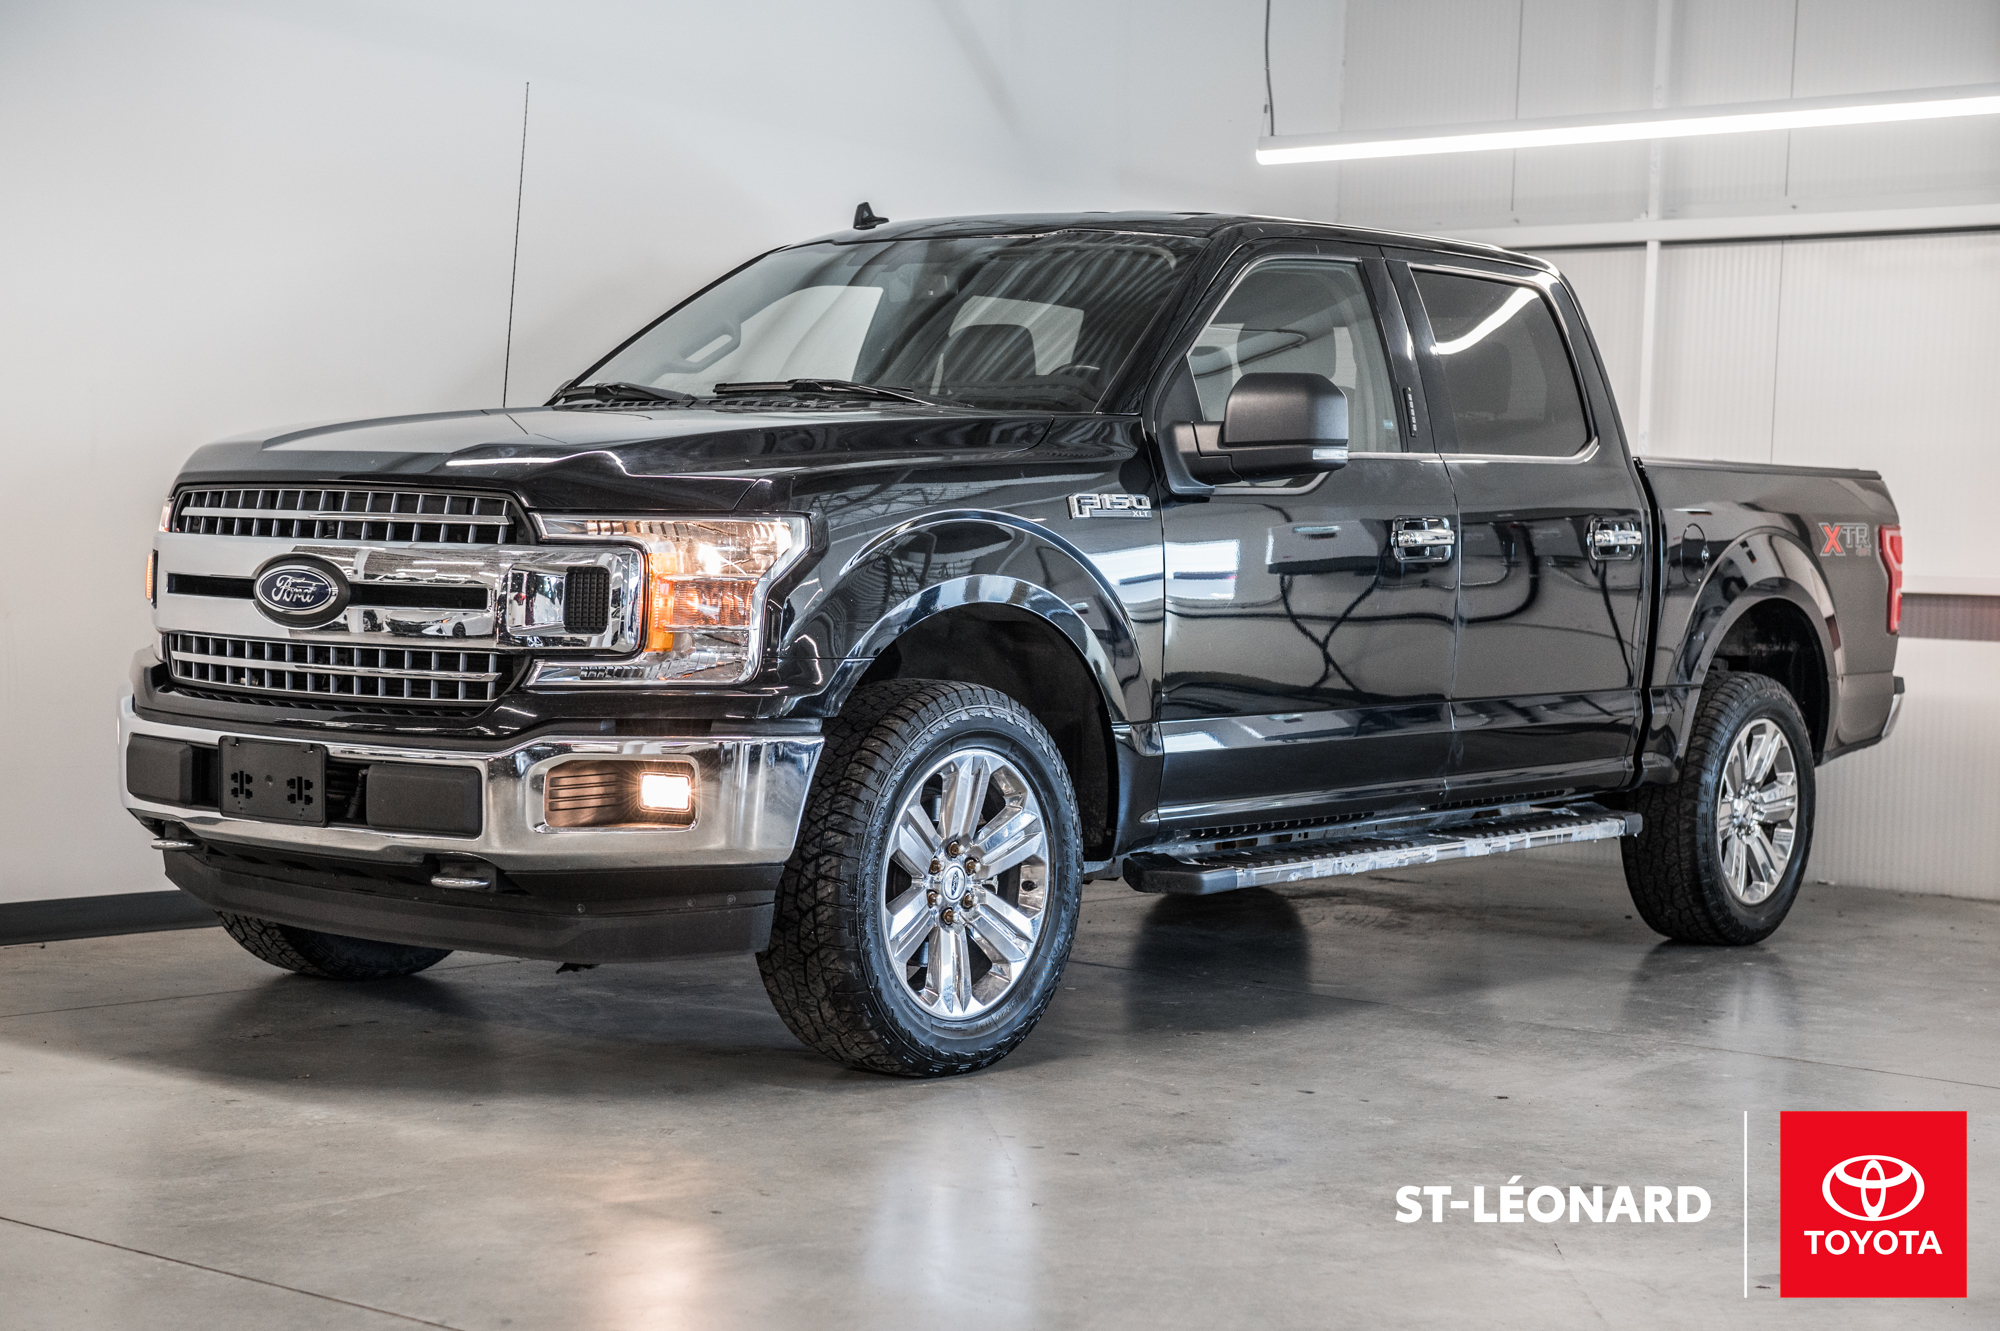 2018 Ford F-150 XLT - 302A - SUPERCREW - 145WB - 4X4 - 6PLACE